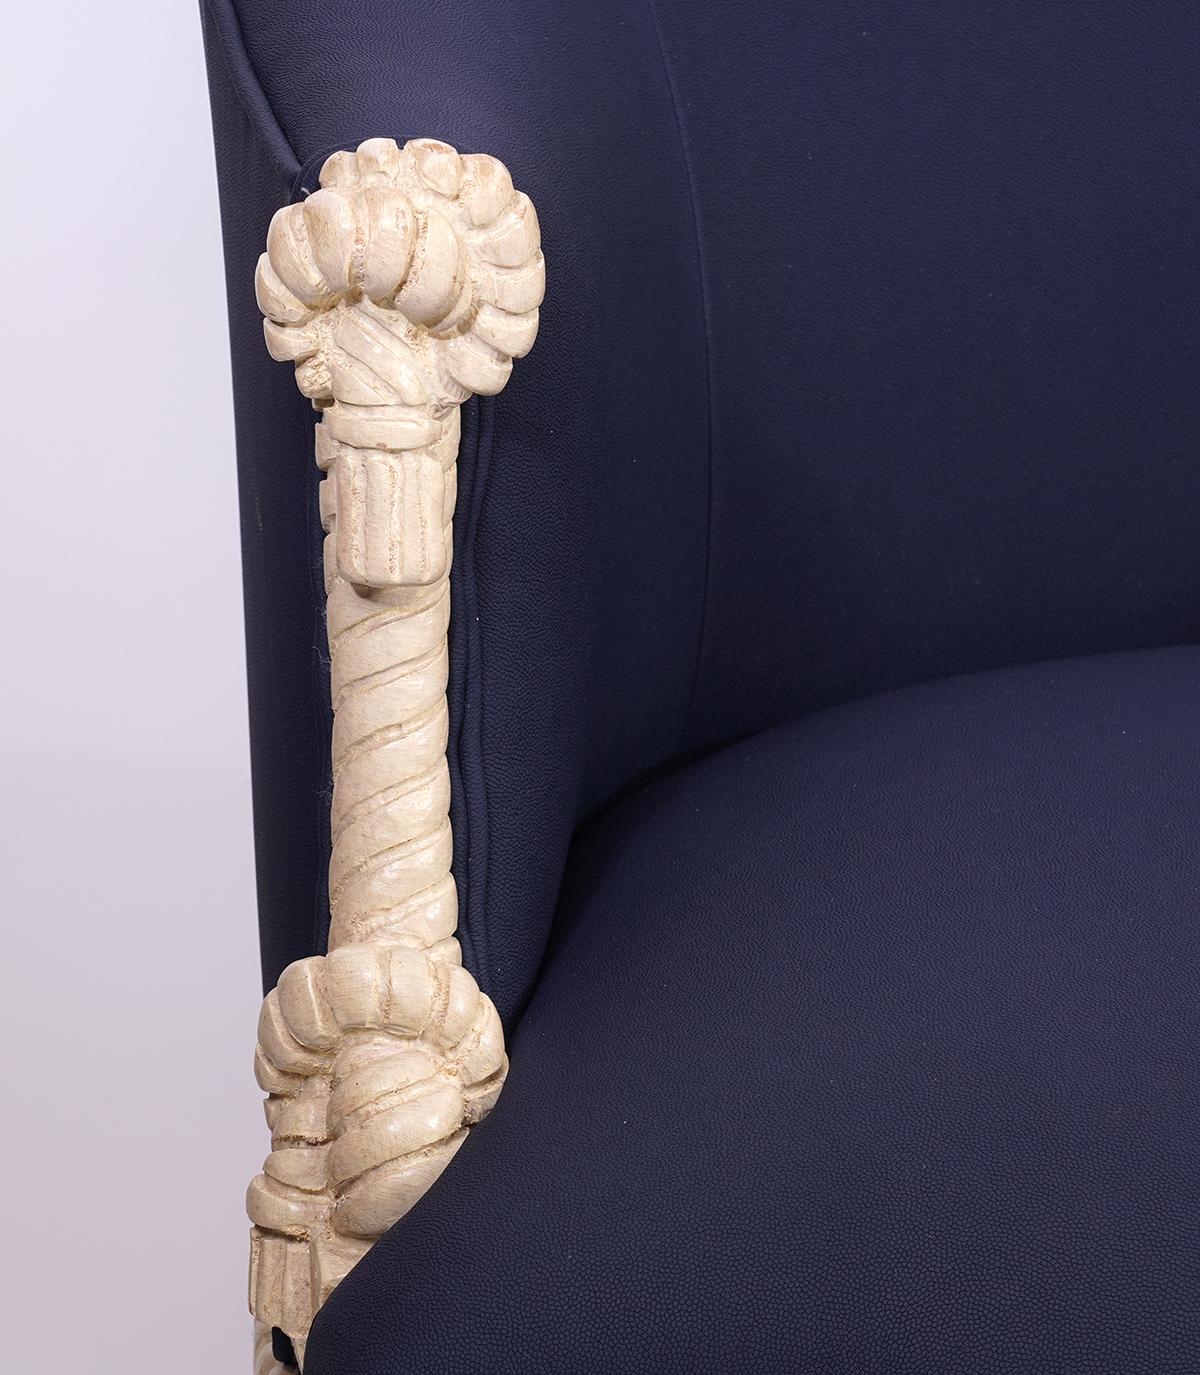 This unusual and intriguing chair is fashioned in the manner of A. M. E. Fournier, a famous 19th century French furniture designer. They feature a carved and painted rope, knot and tassel frame and attractive blue upholstery. The chair bears the